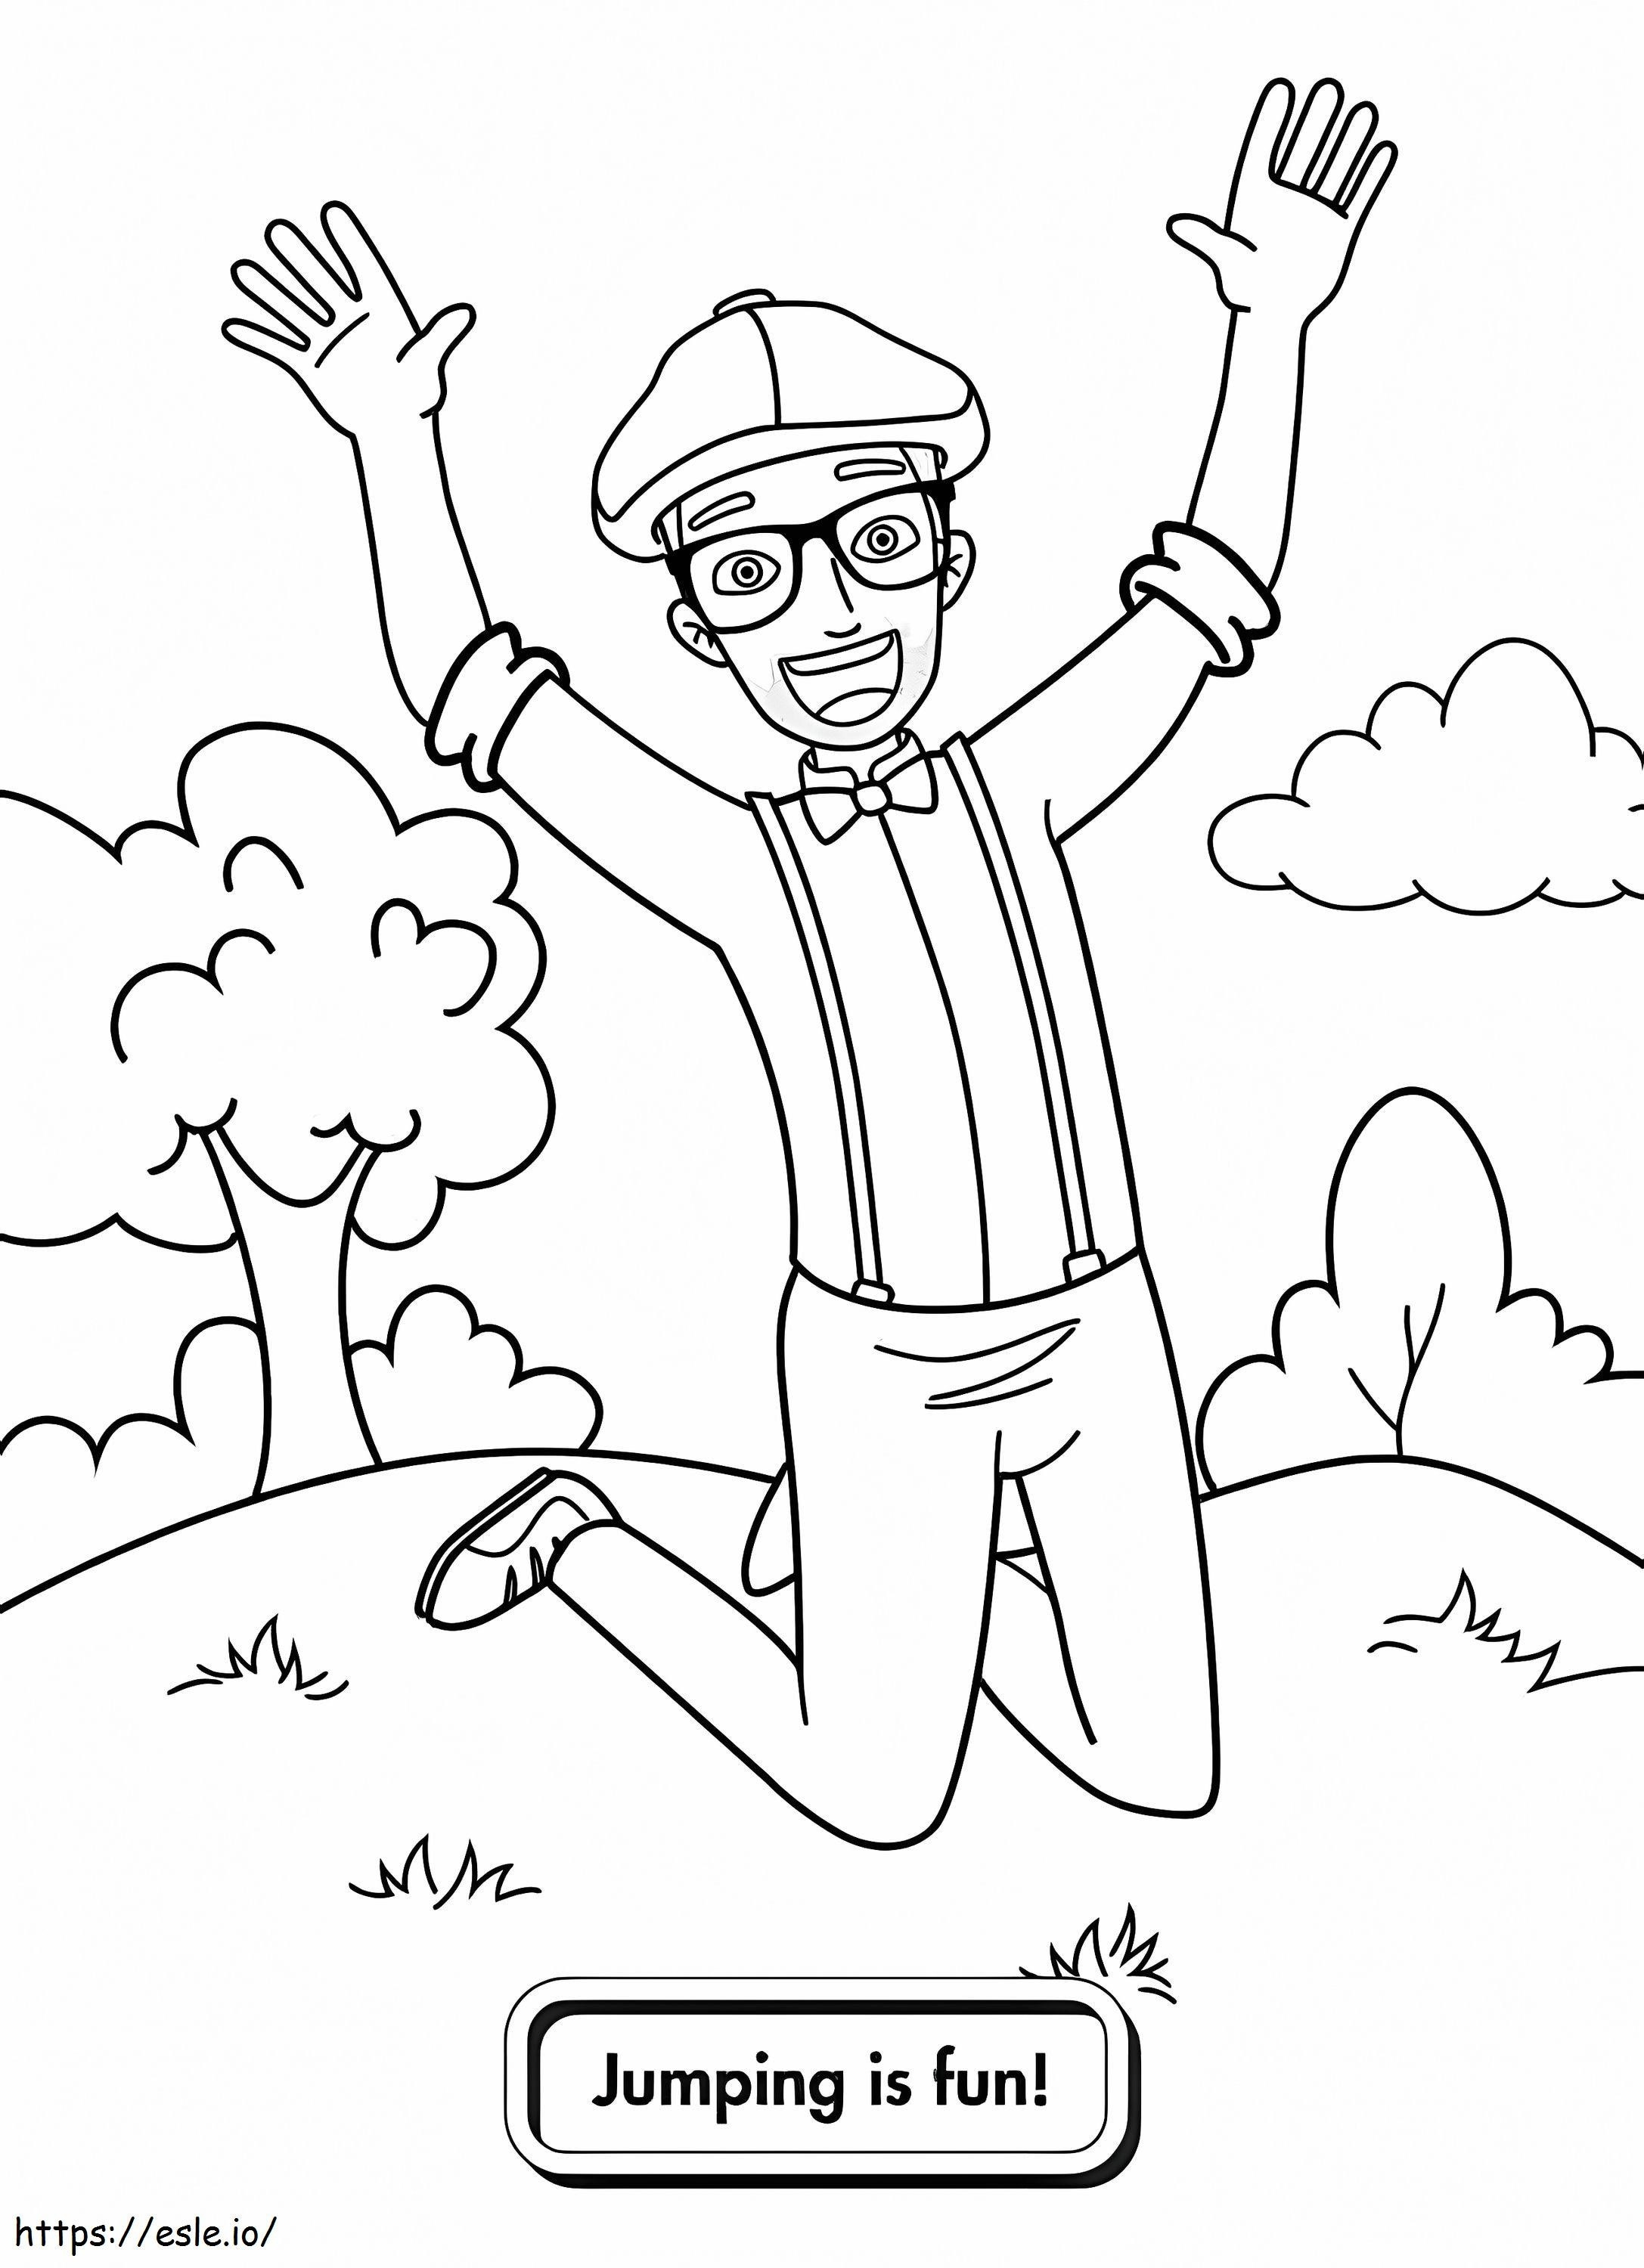 Jumping Blippi coloring page